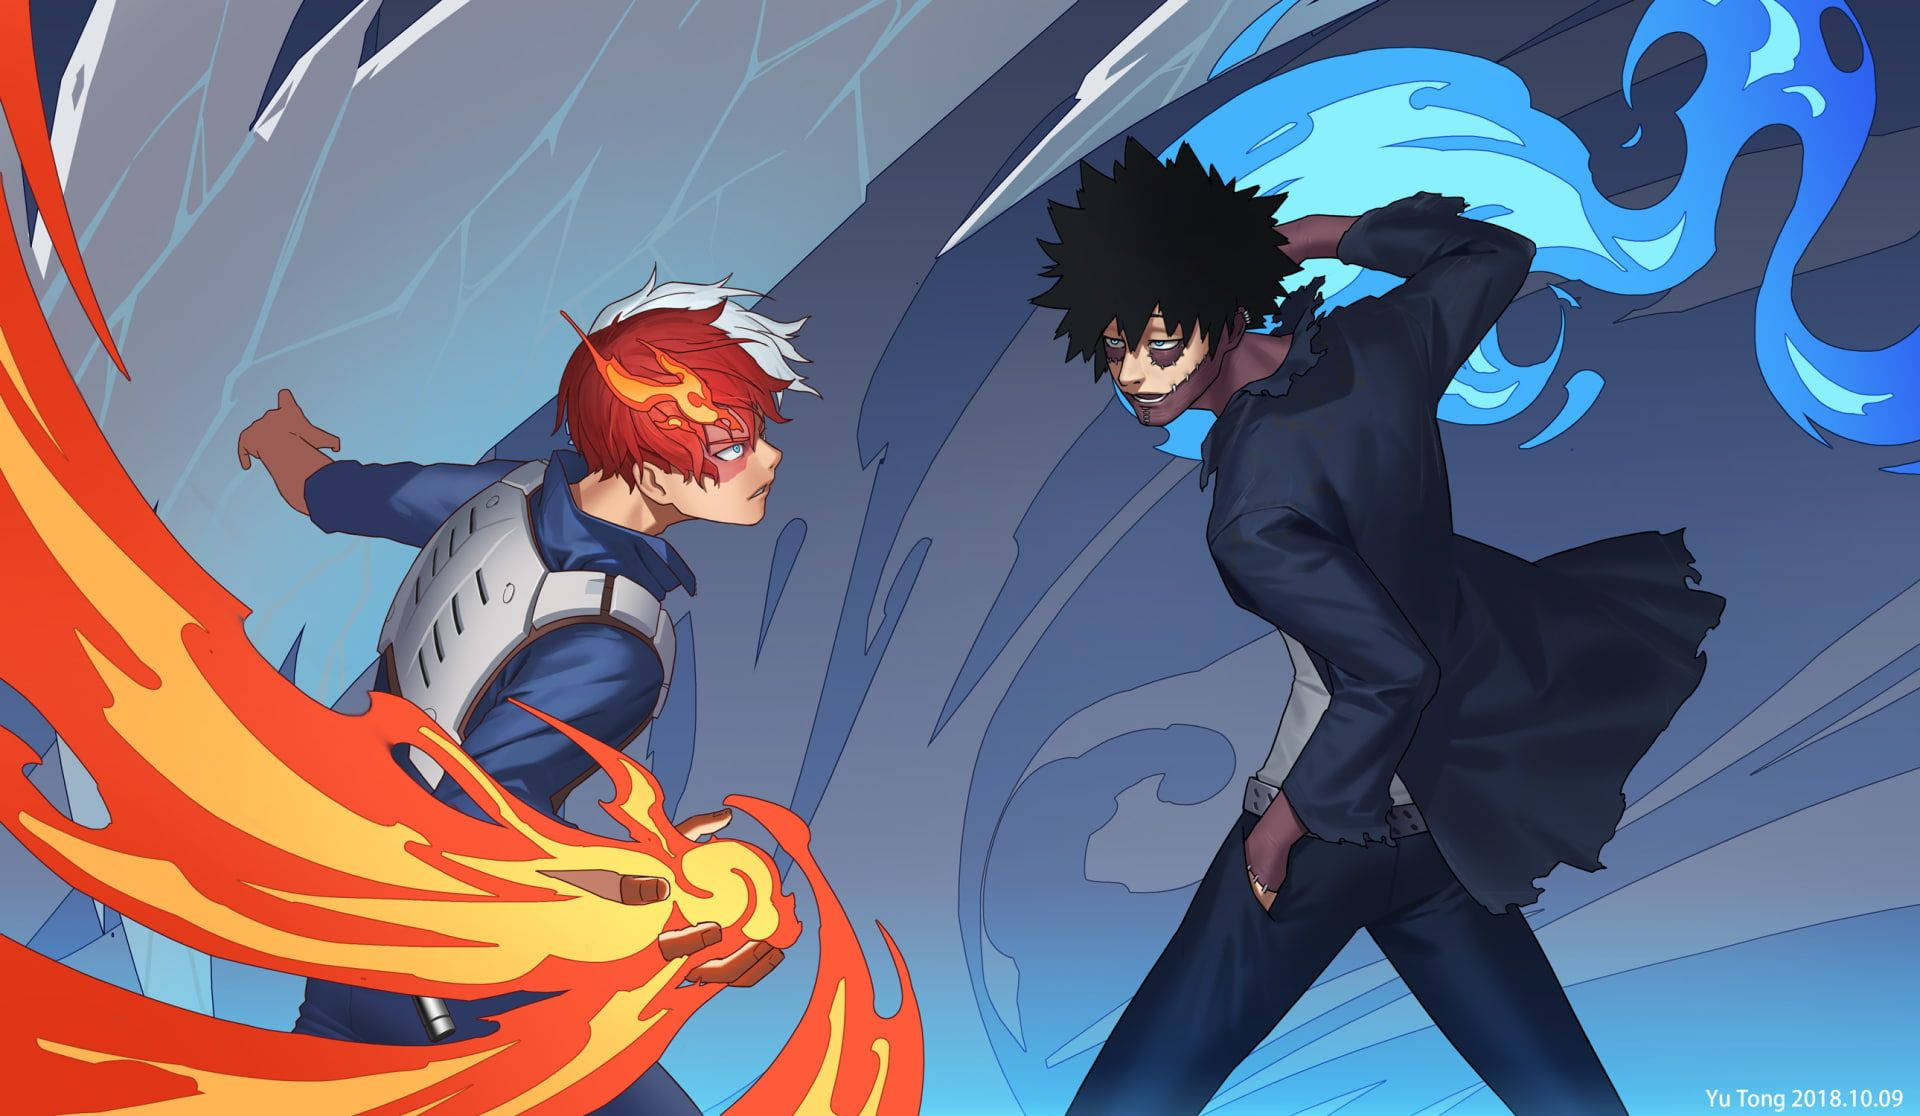 Two Users Of The Charismatic Quirk Mysteriousness - Shoto And Dabi